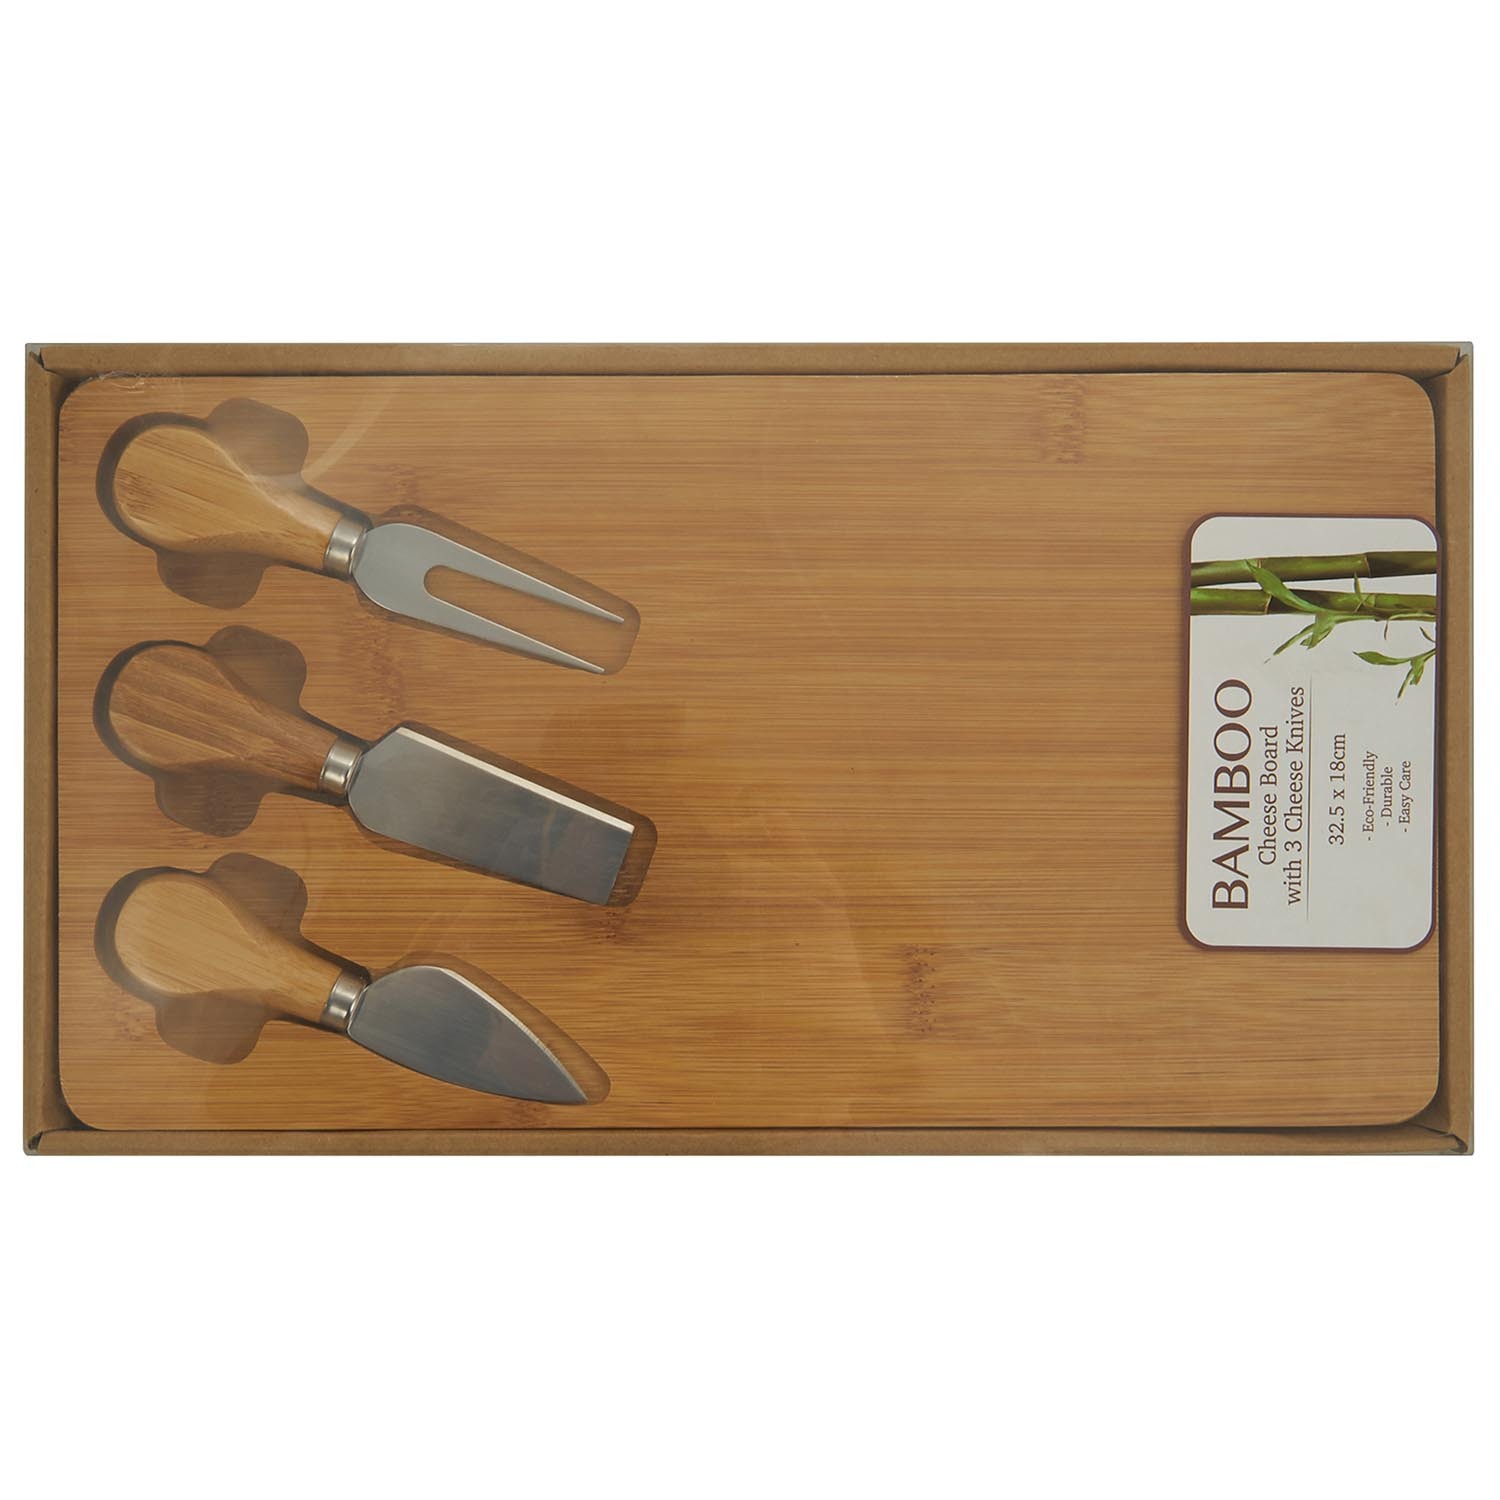 Bamboo Cheese Board with 3 Cheese Knives - Brown Image 1